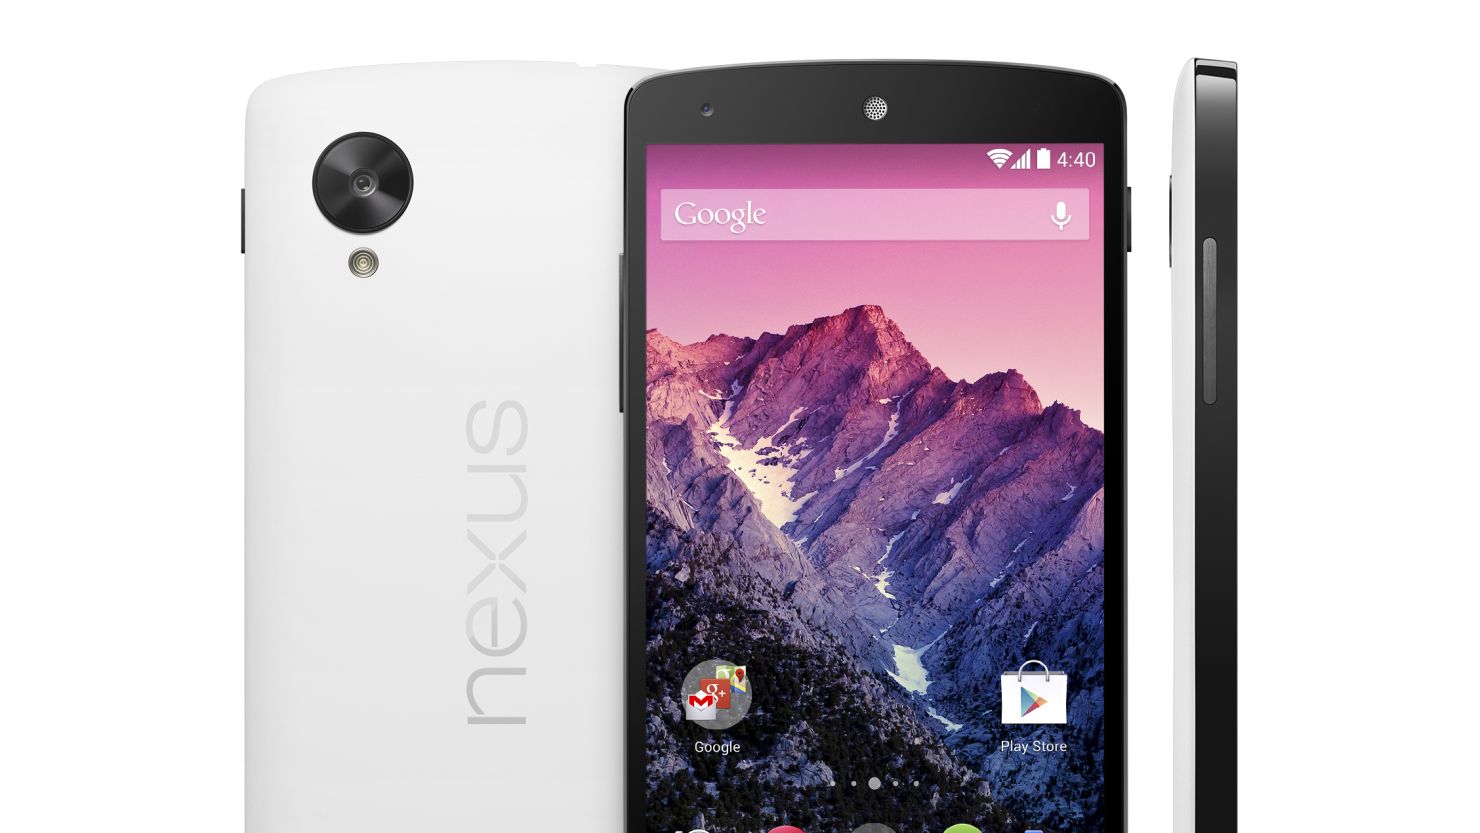 Google on Thursday announced its new Nexus 5 smartphone, which went on sale immediately.